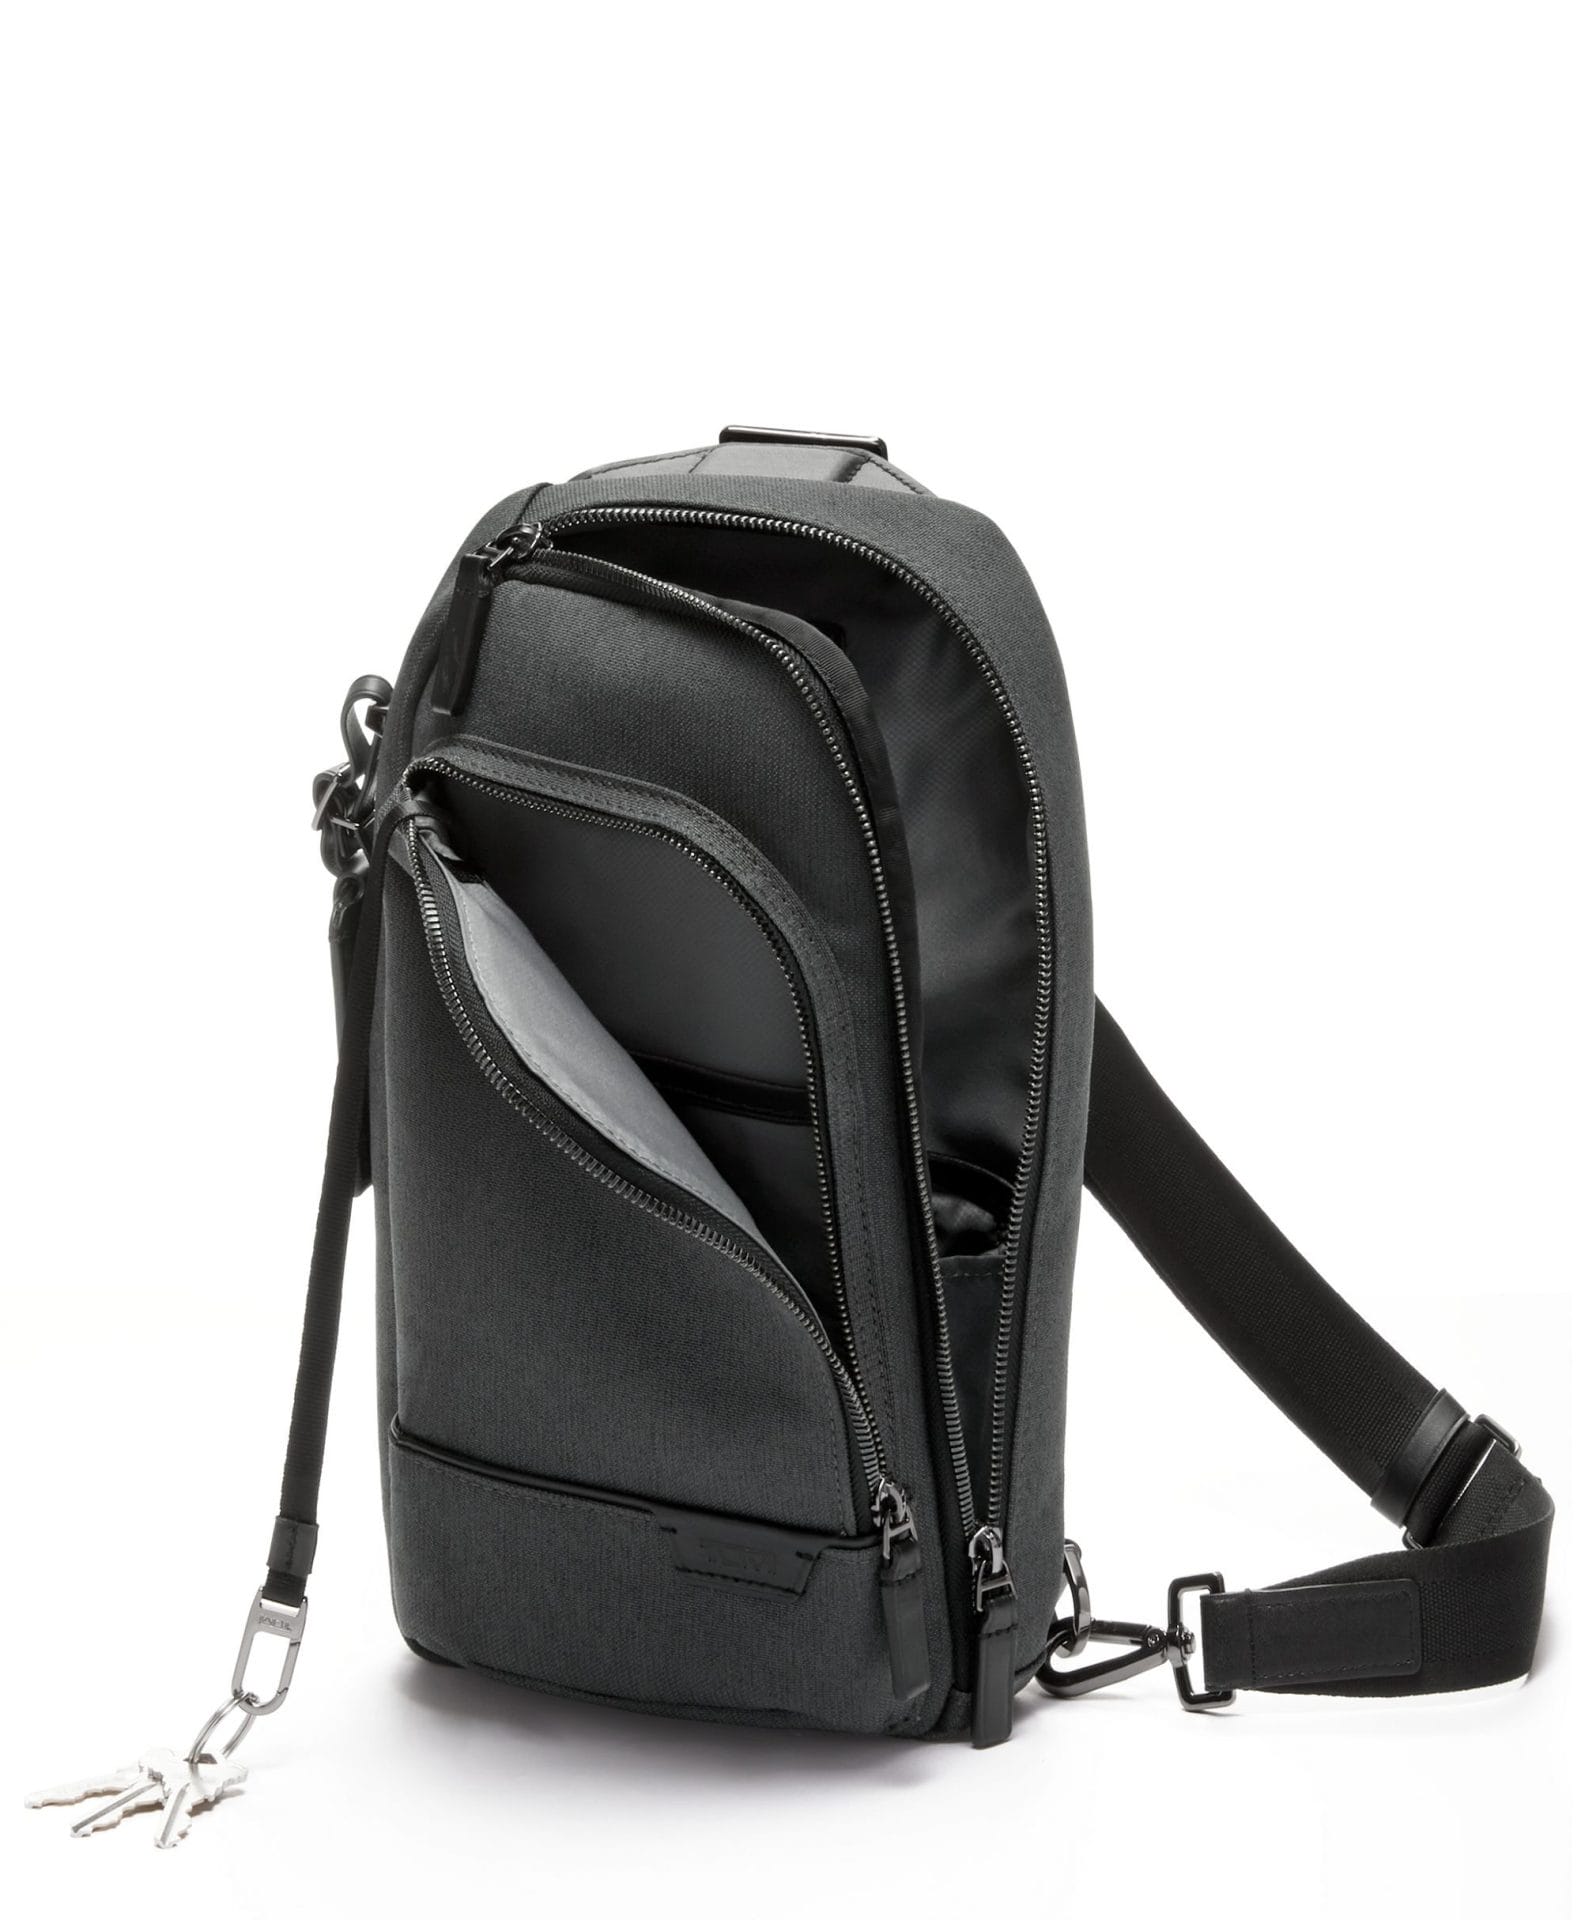 Proceed Casual Sling Bag - Protecta